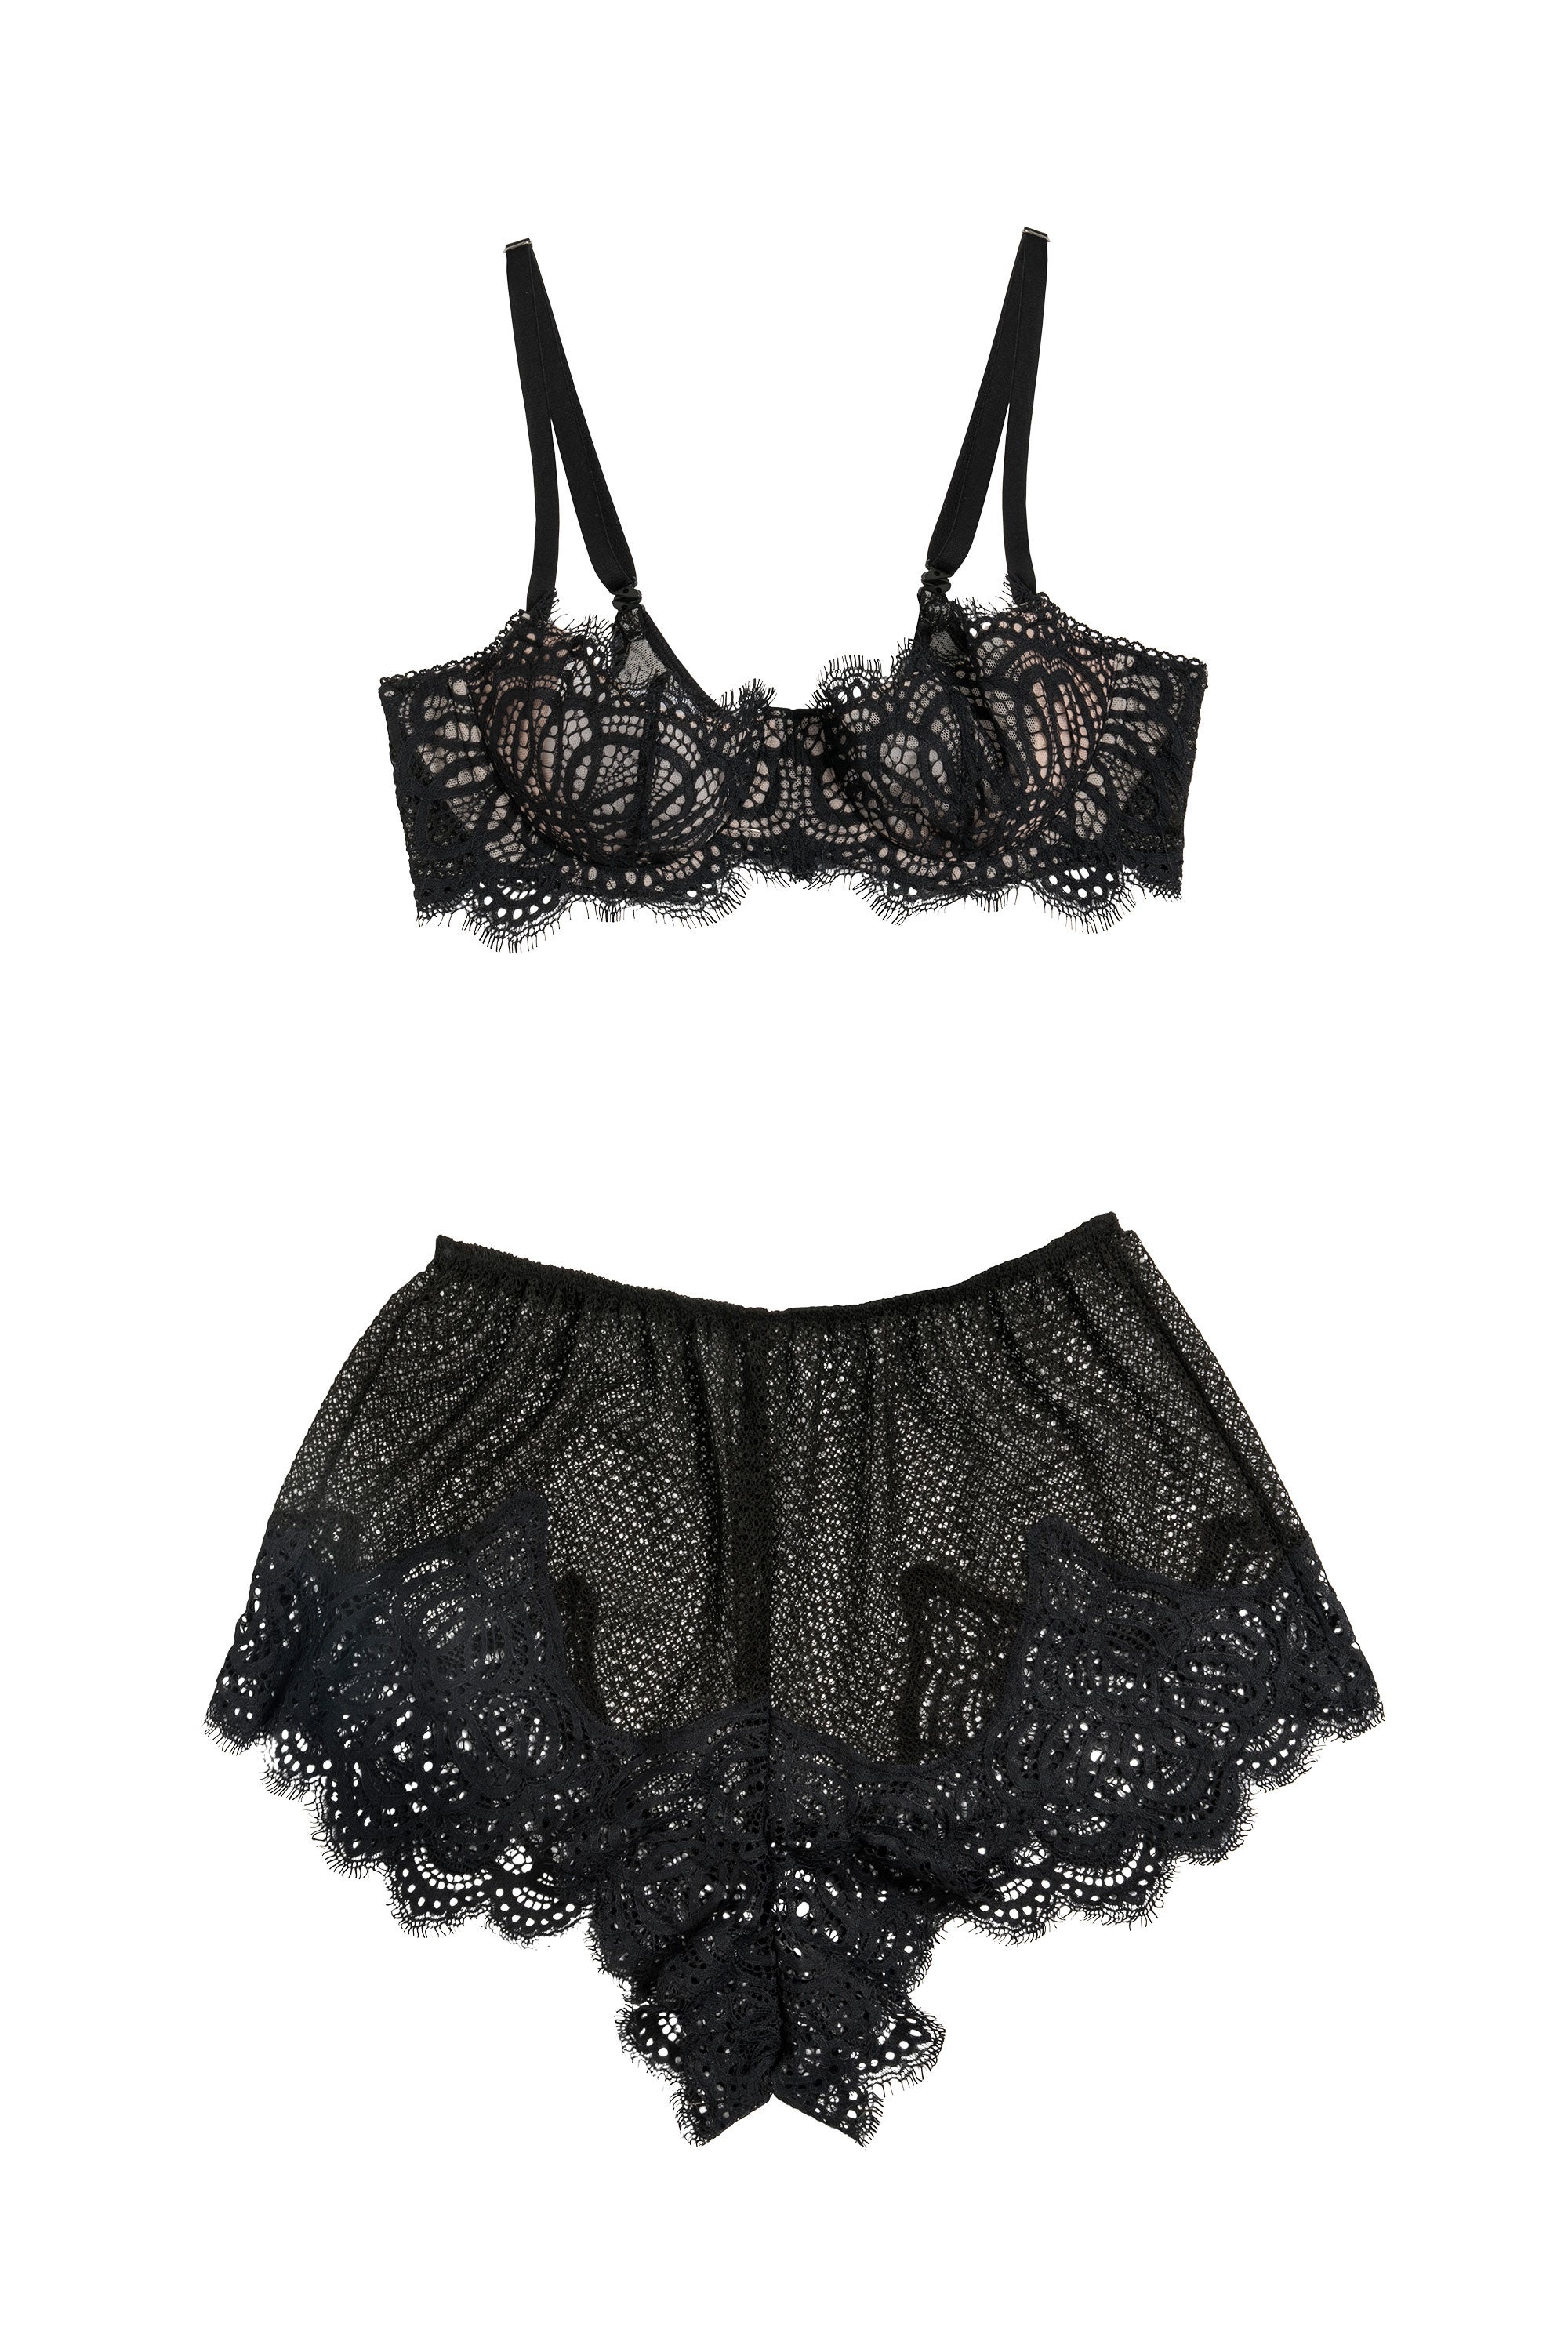 You'll Fall in Love With These Pretty Lingerie Sets | Essence